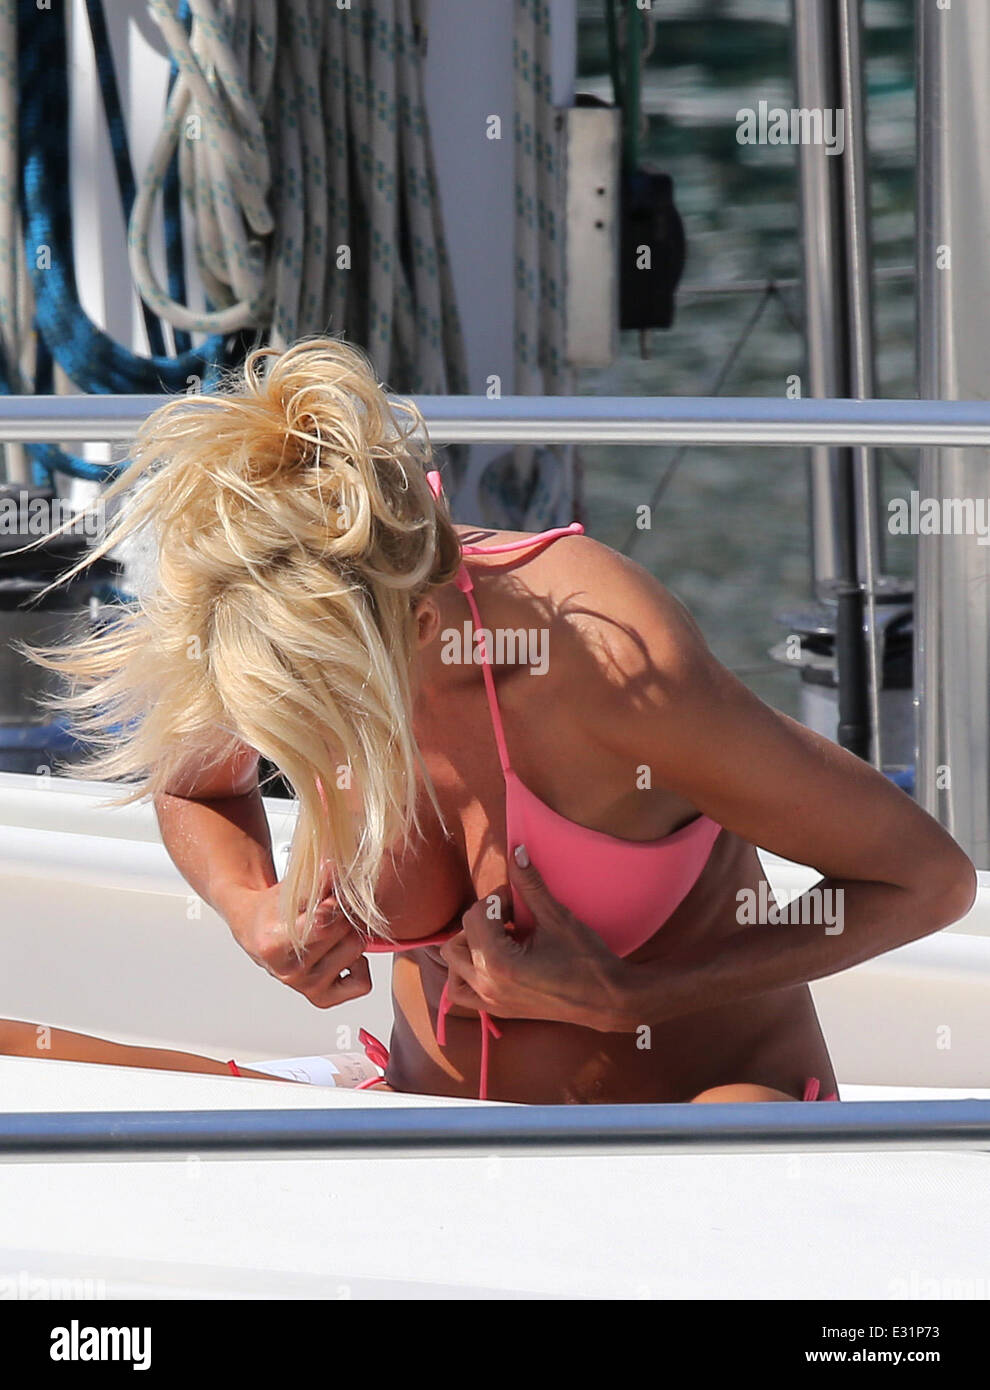 Victoria Silvstedt sunbathes on her yacht in the port of Beaulieu in the French Riviera  Featuring: Victoria Silvstedt Where: Be Stock Photo